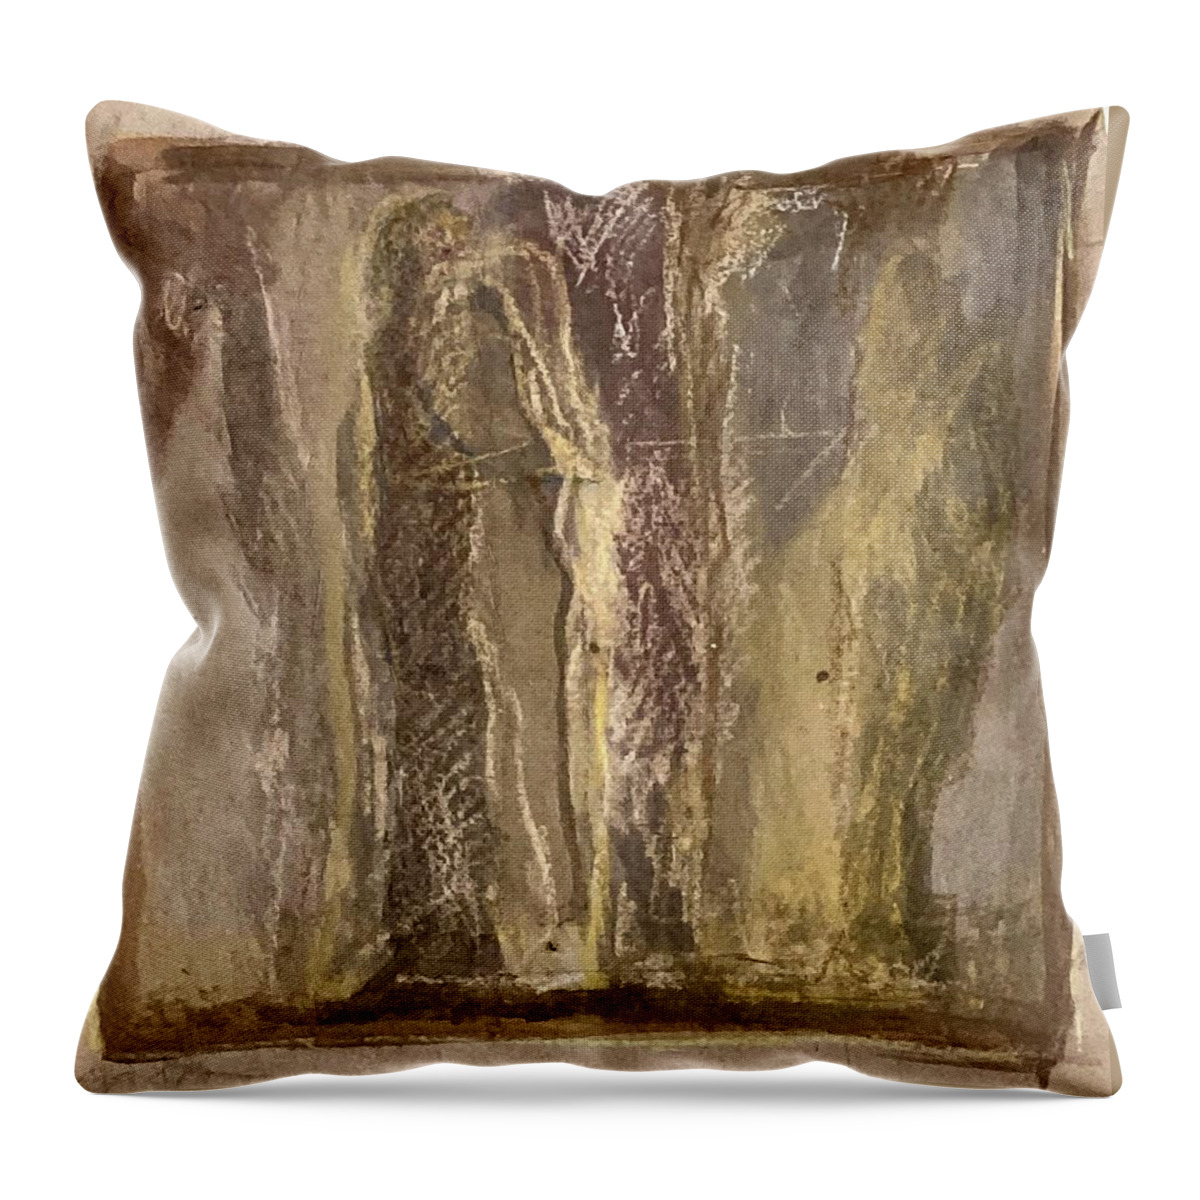 Couple Throw Pillow featuring the painting Together and alone by David Euler